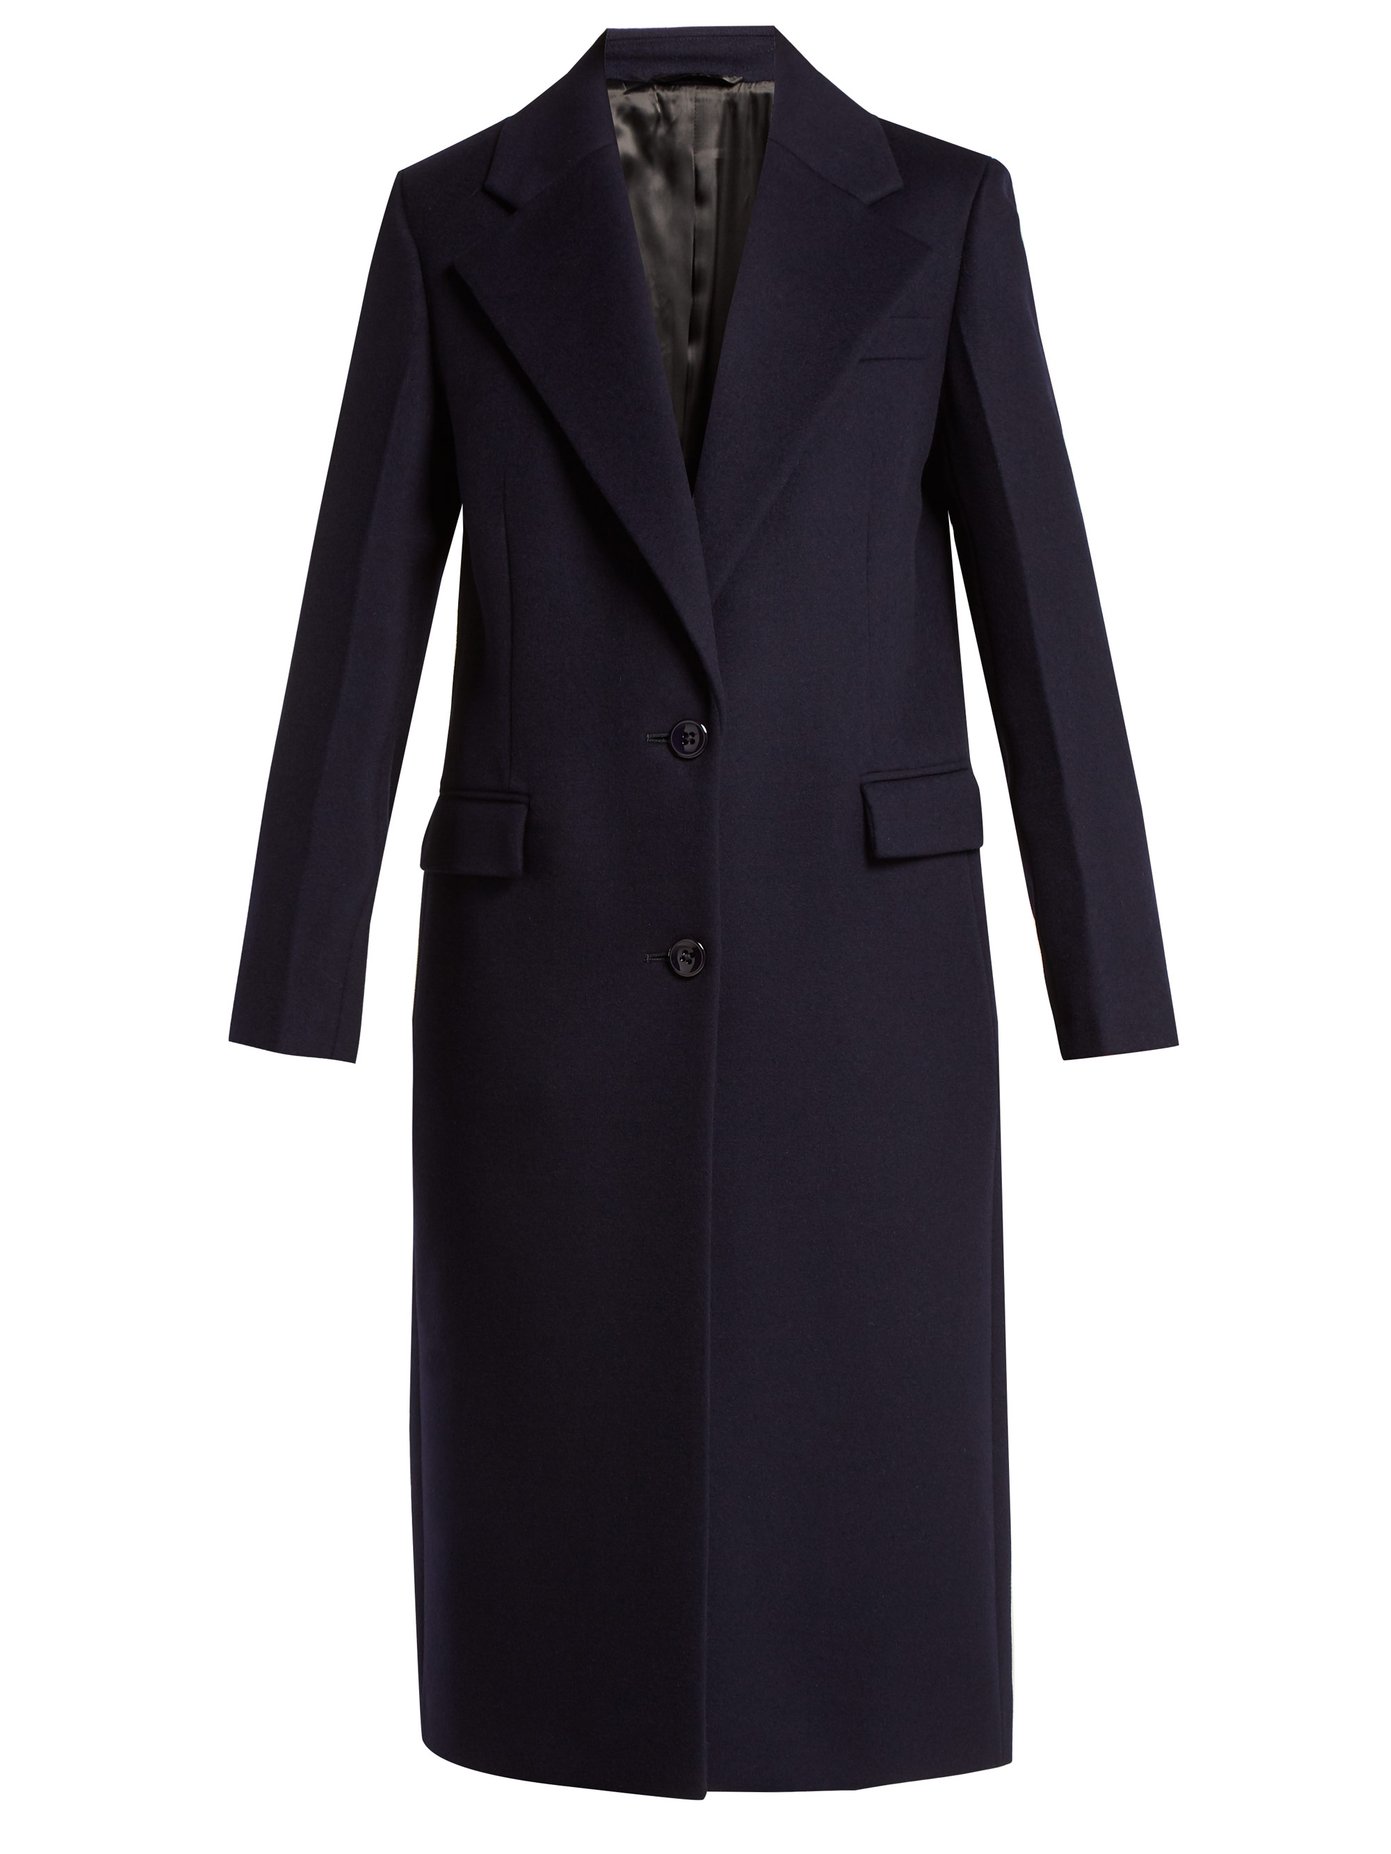 Joseph - Magnus Single-Breasted Wool-Blend Coat - Navy | ABOUT ICONS